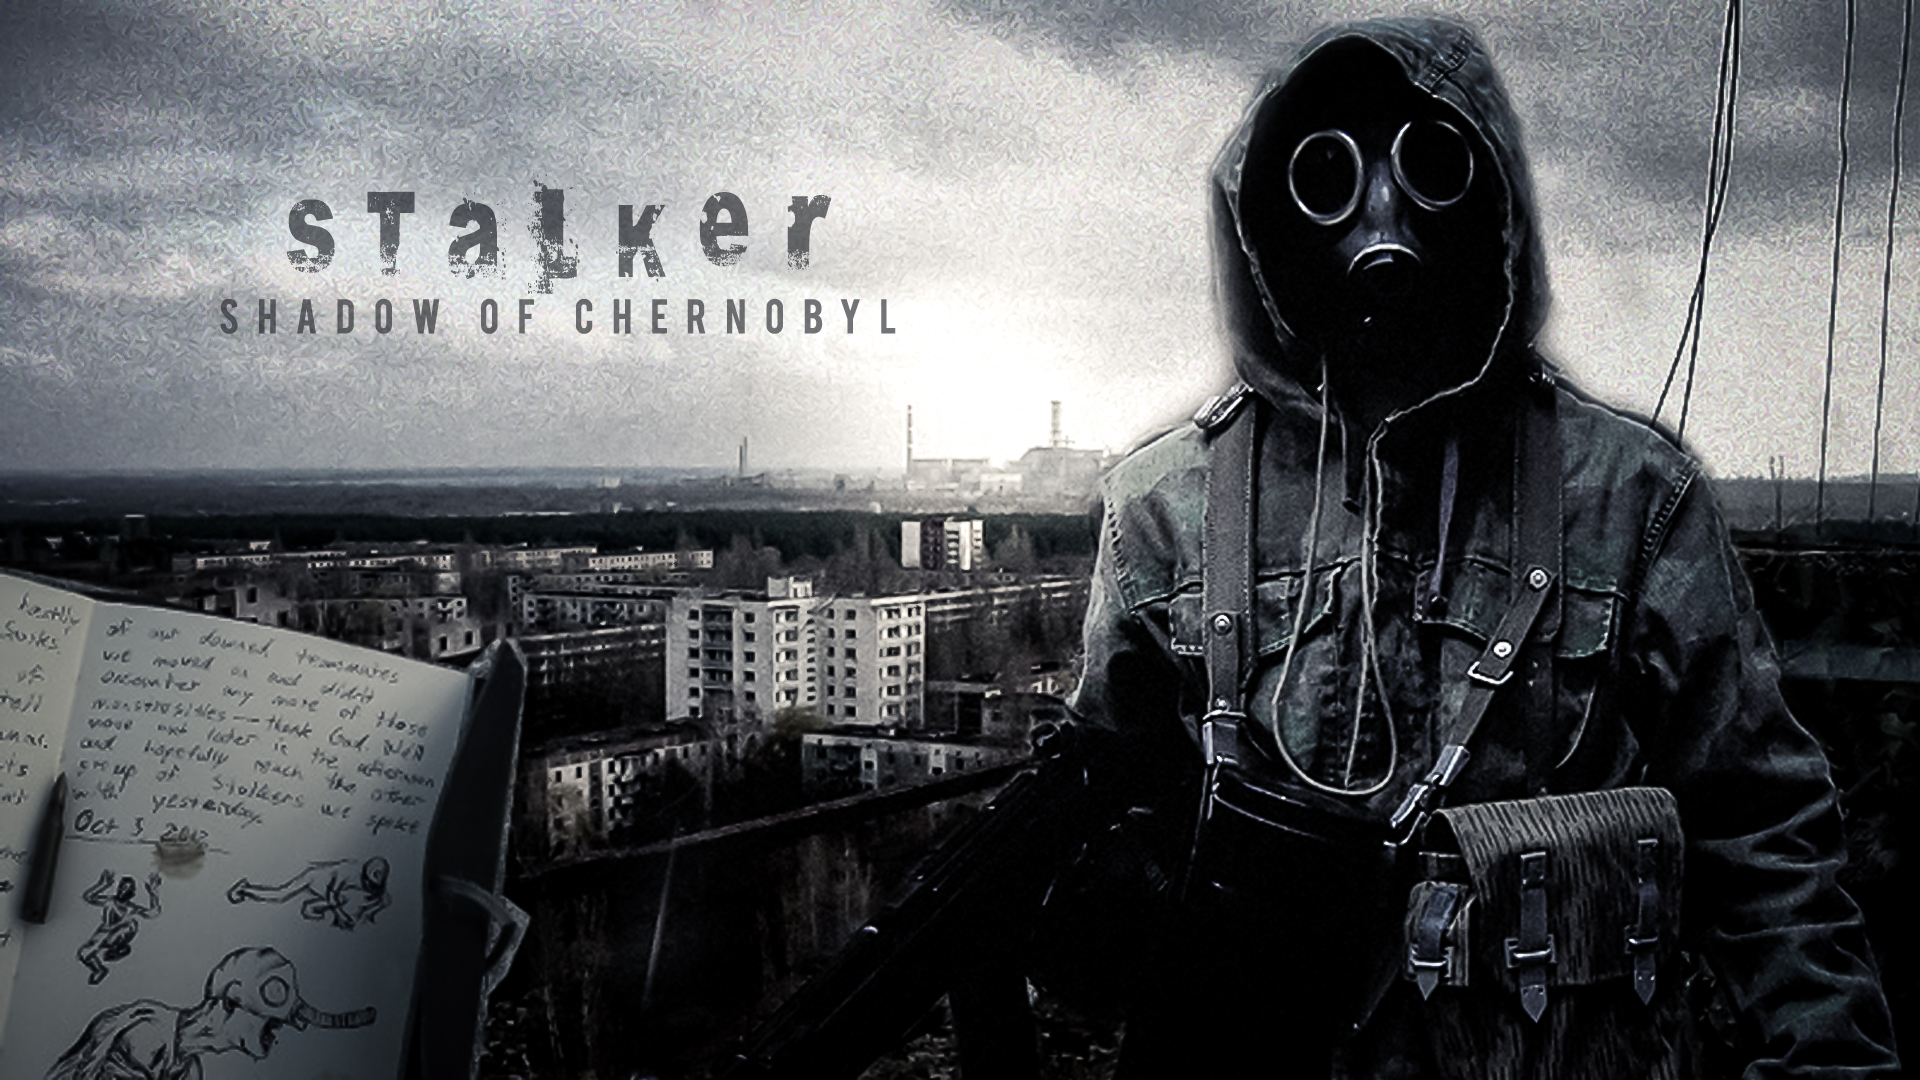 Stalker   Wallpaper 2013 version by Caparzofpc on